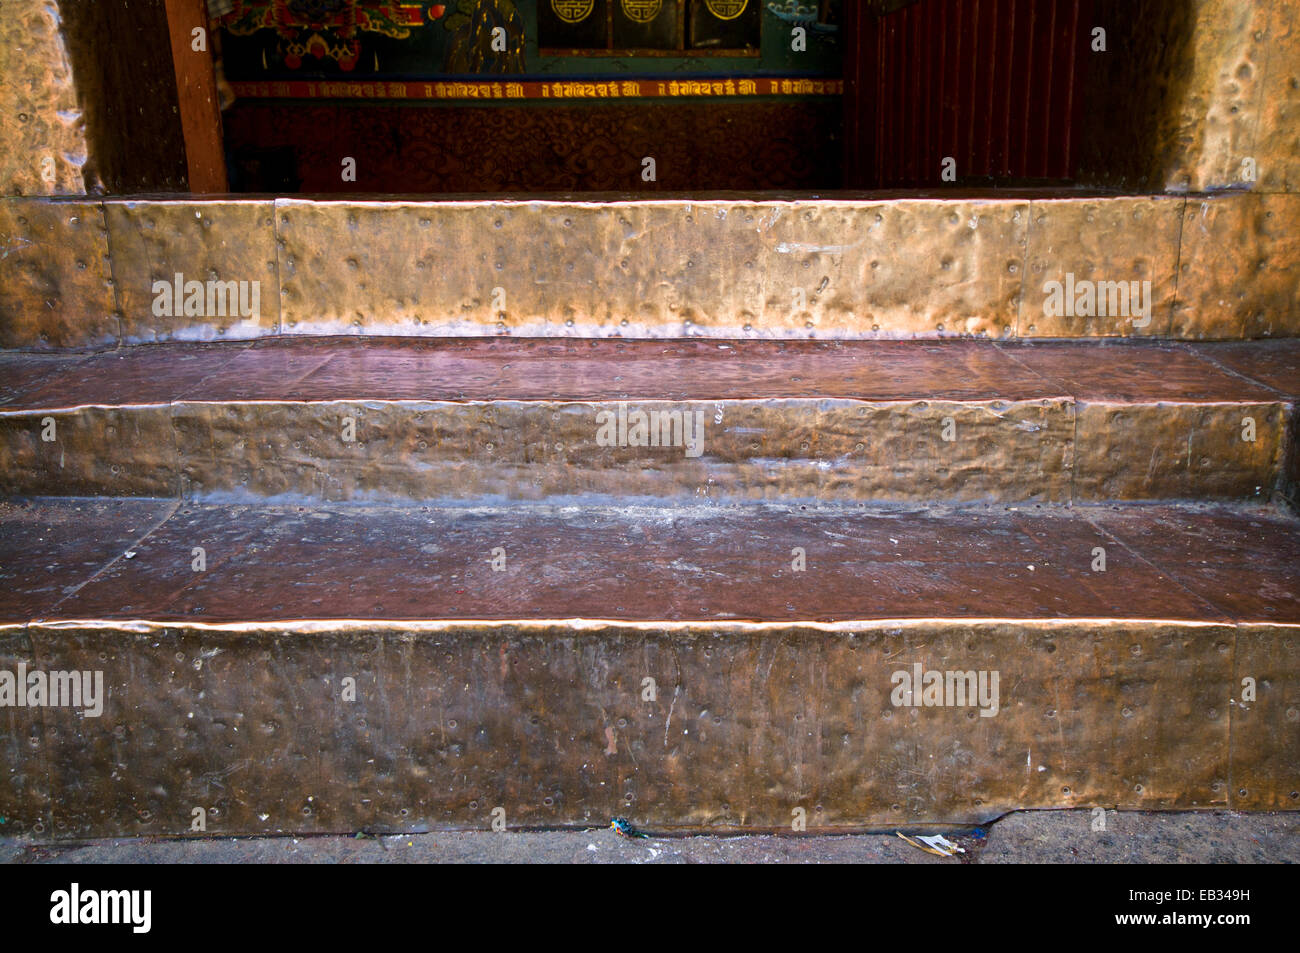 The dinted and worn brass entrance steps of an ancient Buddhist monastery polished by the shuffling feet of monks. Stock Photo